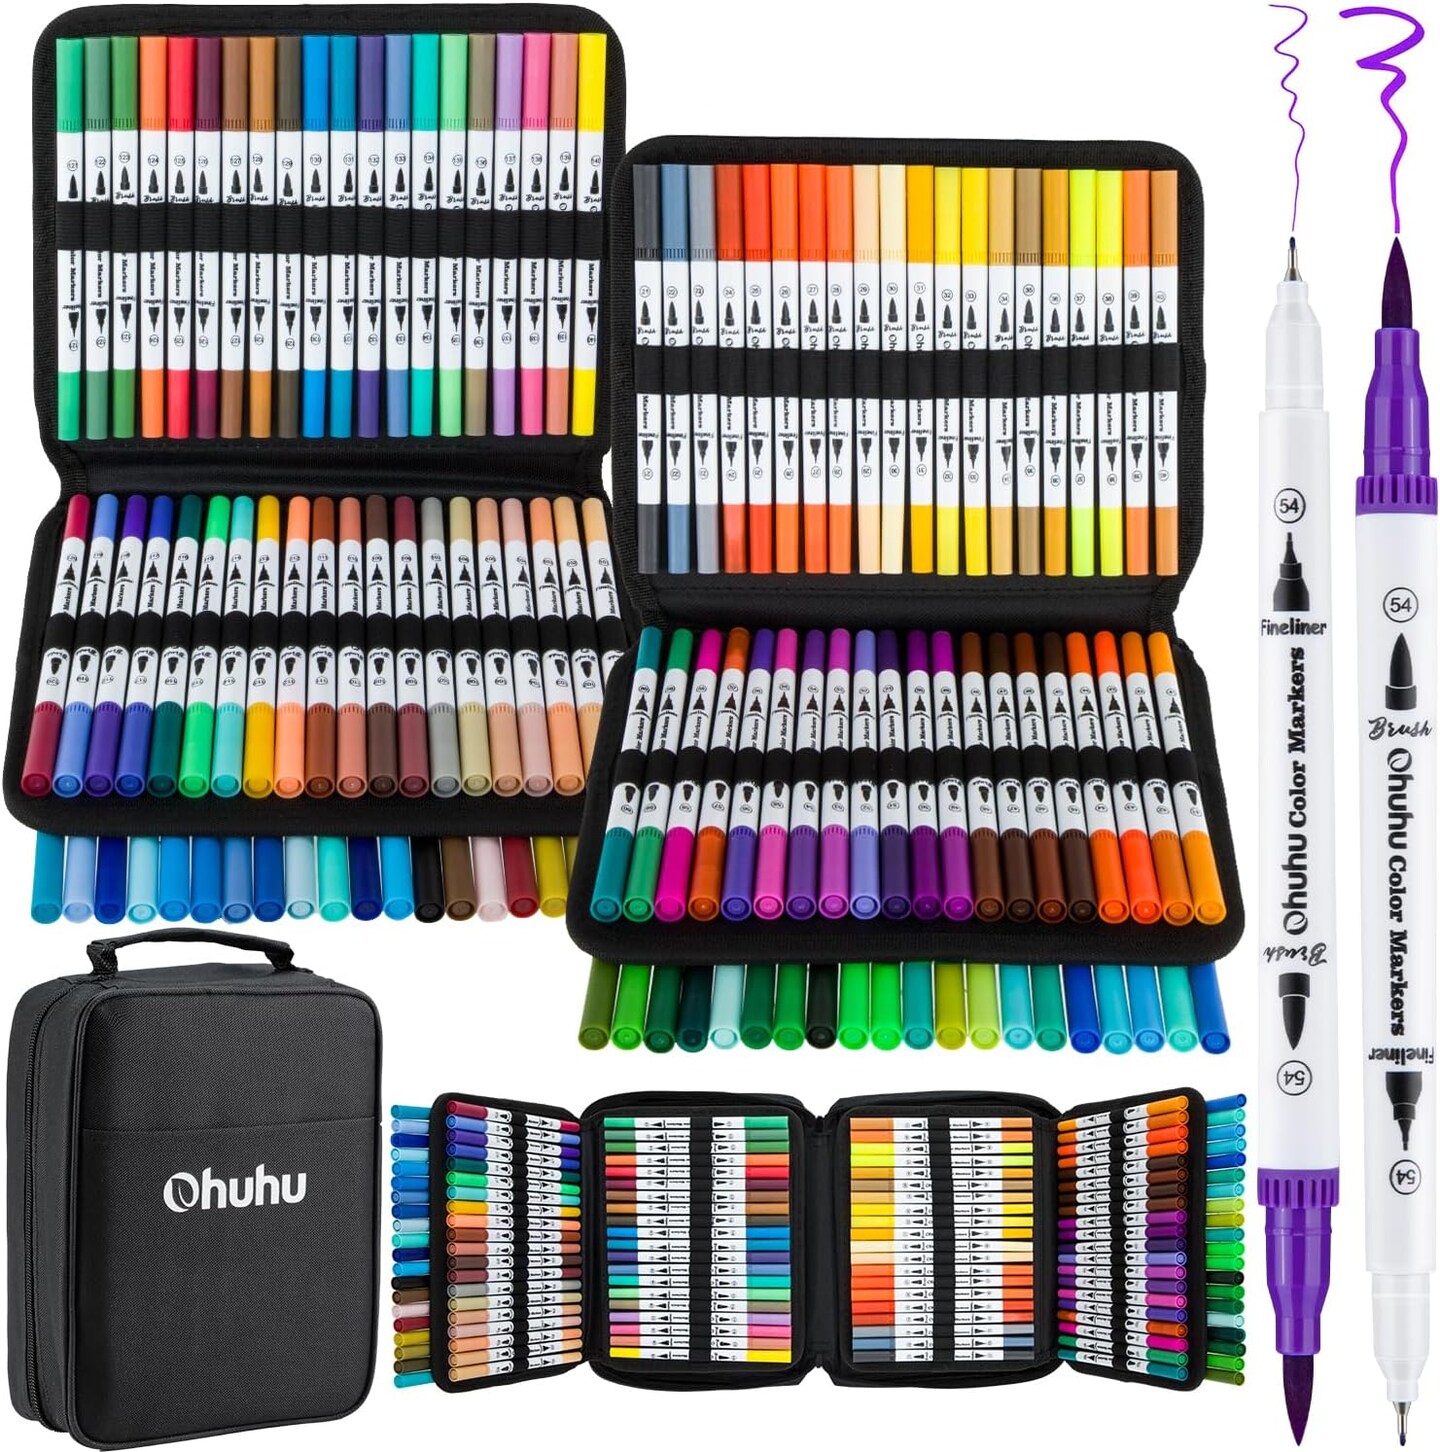 Ohuhu Water Based Markers for Adult Coloring Books: 160 Colors Brush Pens, Dual Tip Brush &#x26; Fine Drawing Pens, Coloring Markers for Calligraphy Bullet Journal with Carrying Case -Maui (White Package/Black Package)